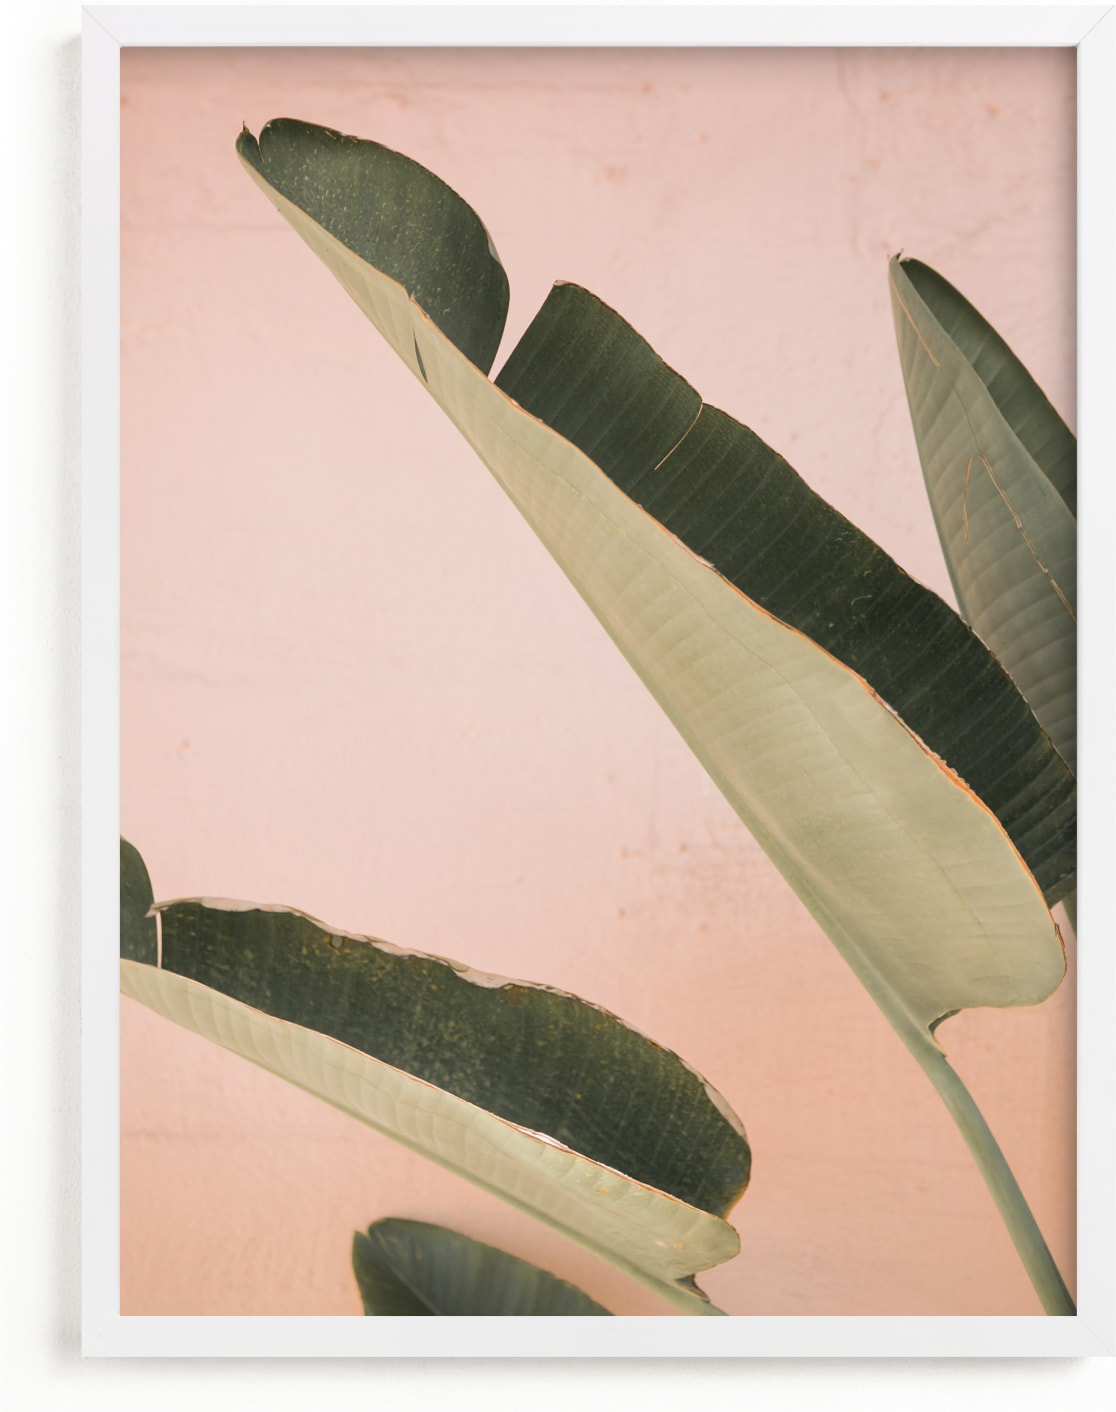 This is a pink art by ARIANE MOSHAYEDI called Pink Banana Leaves.